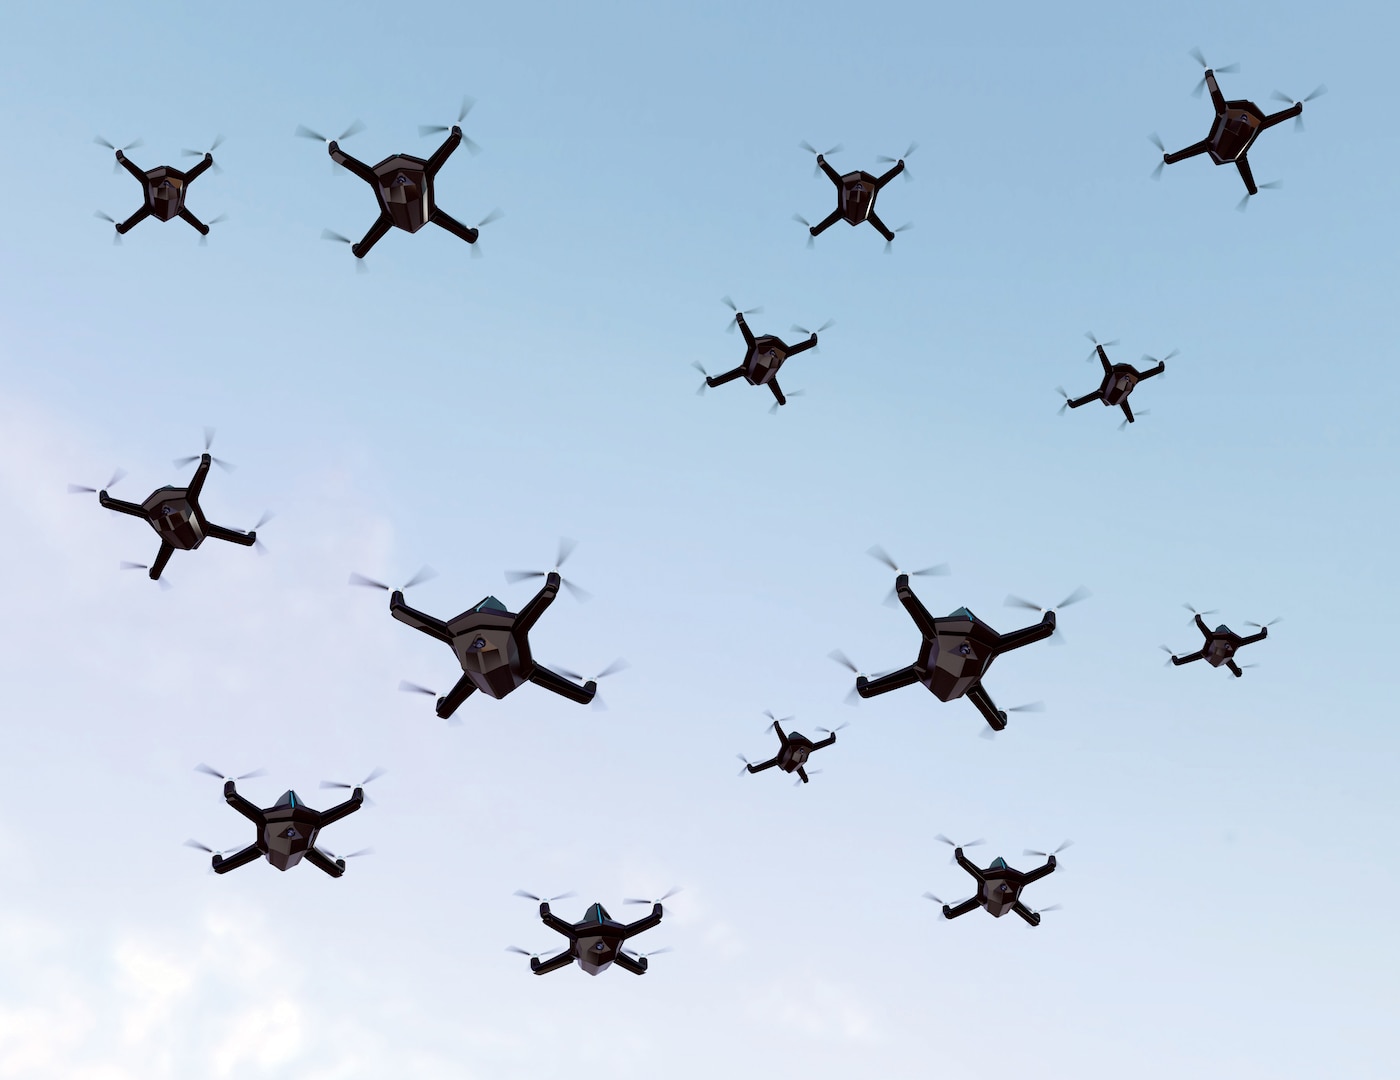 Swarm of security drones with surveillance camera flying in the sky. 3D rendering image.